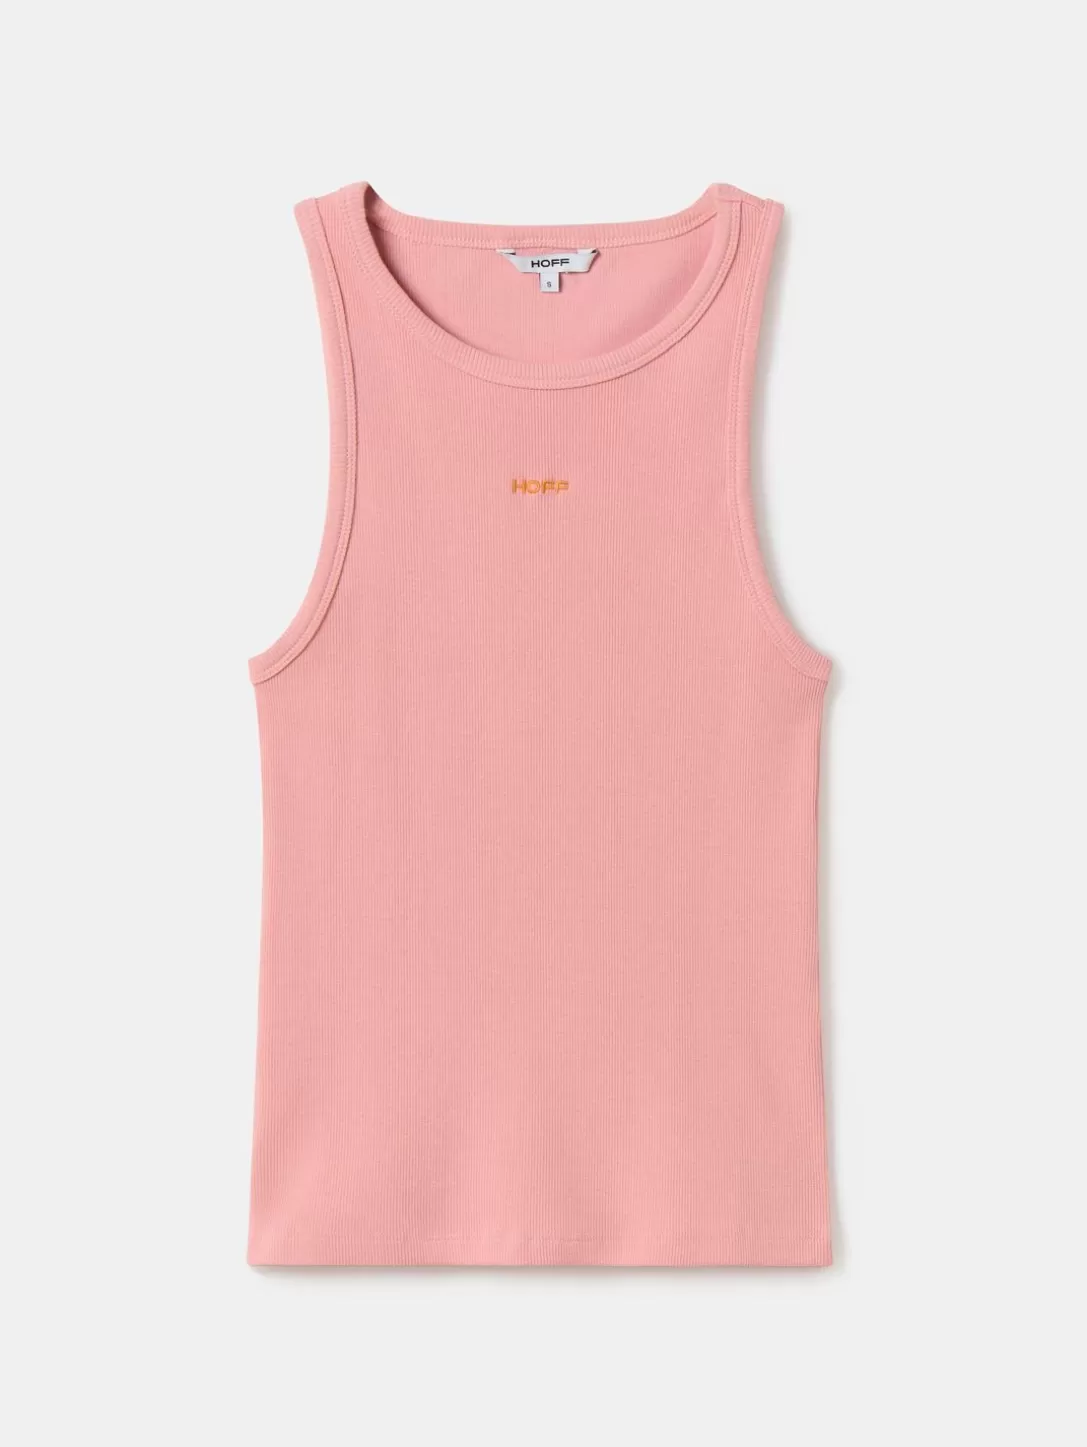 HOFF Top Cayman Pink Clearance